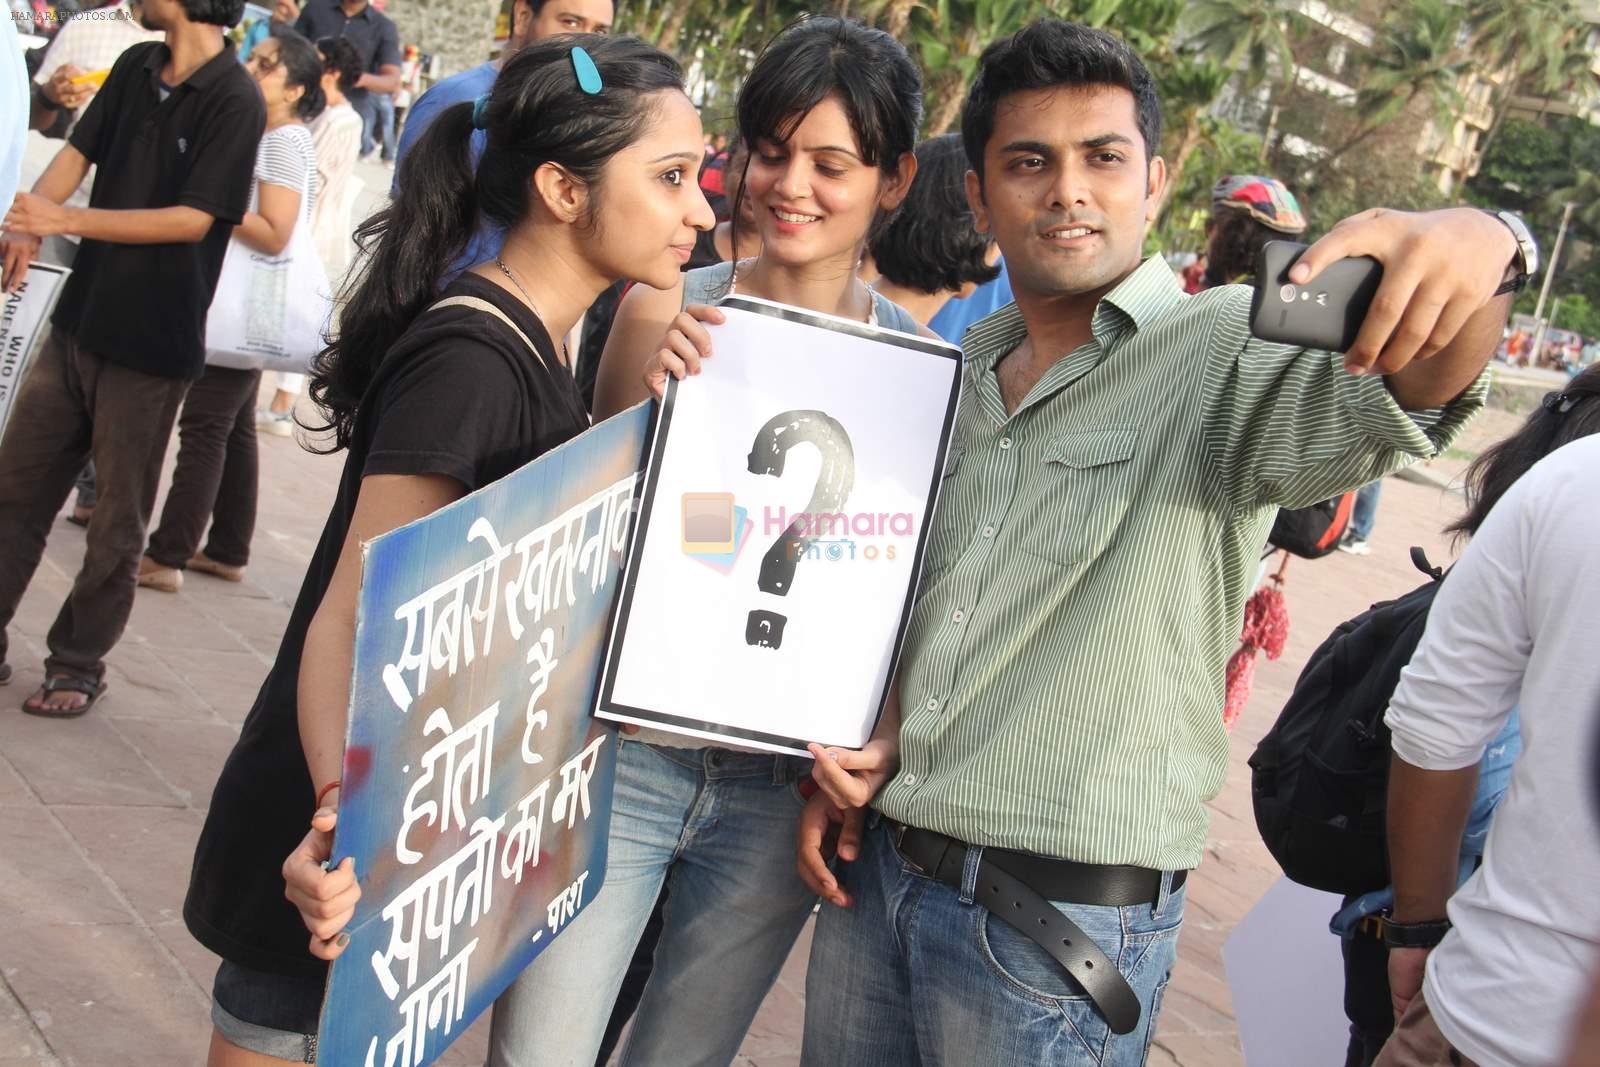 supports the FTII cause and joins the protest at carter road on 2nd July 2015